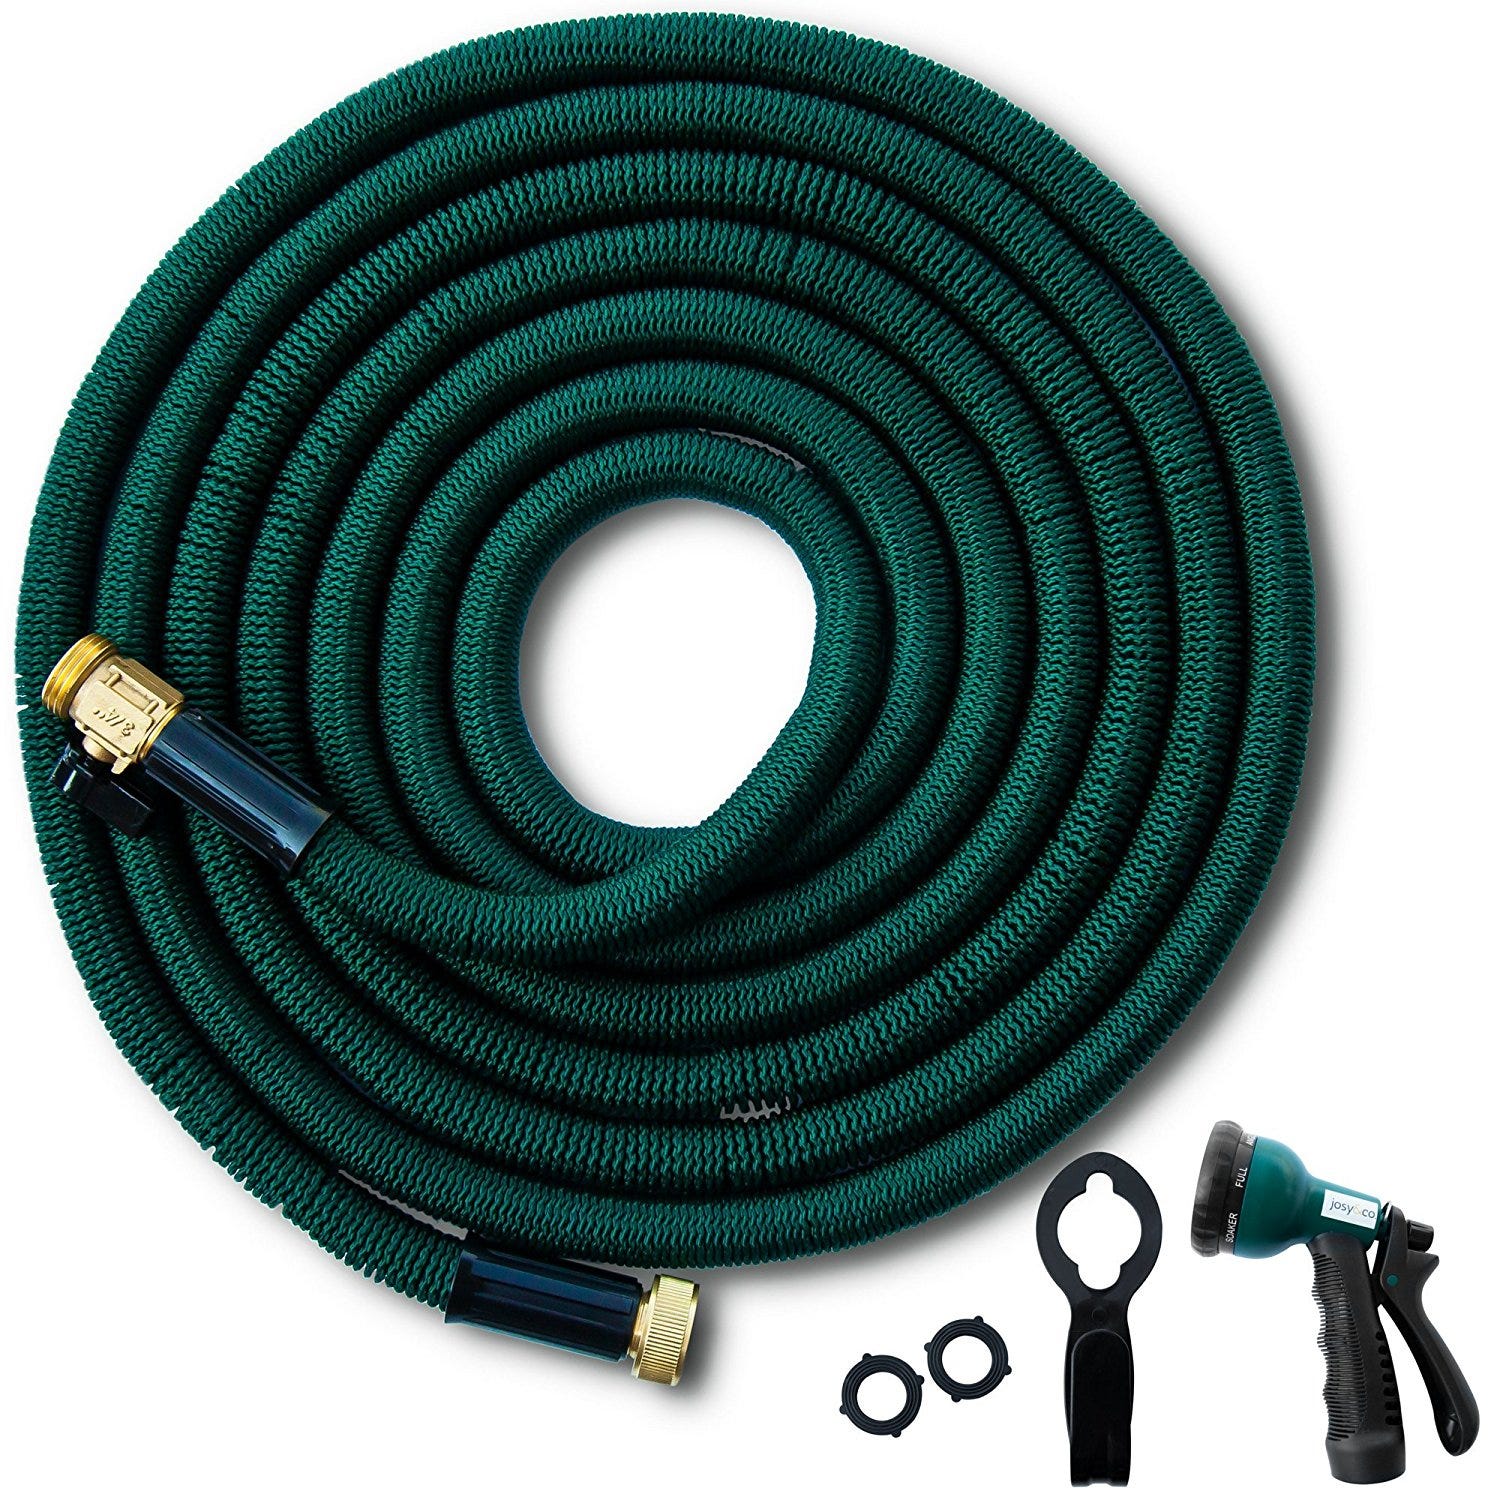 50 Ft Expandable Garden Hose The Review Uncle Gerry Rosso Medium